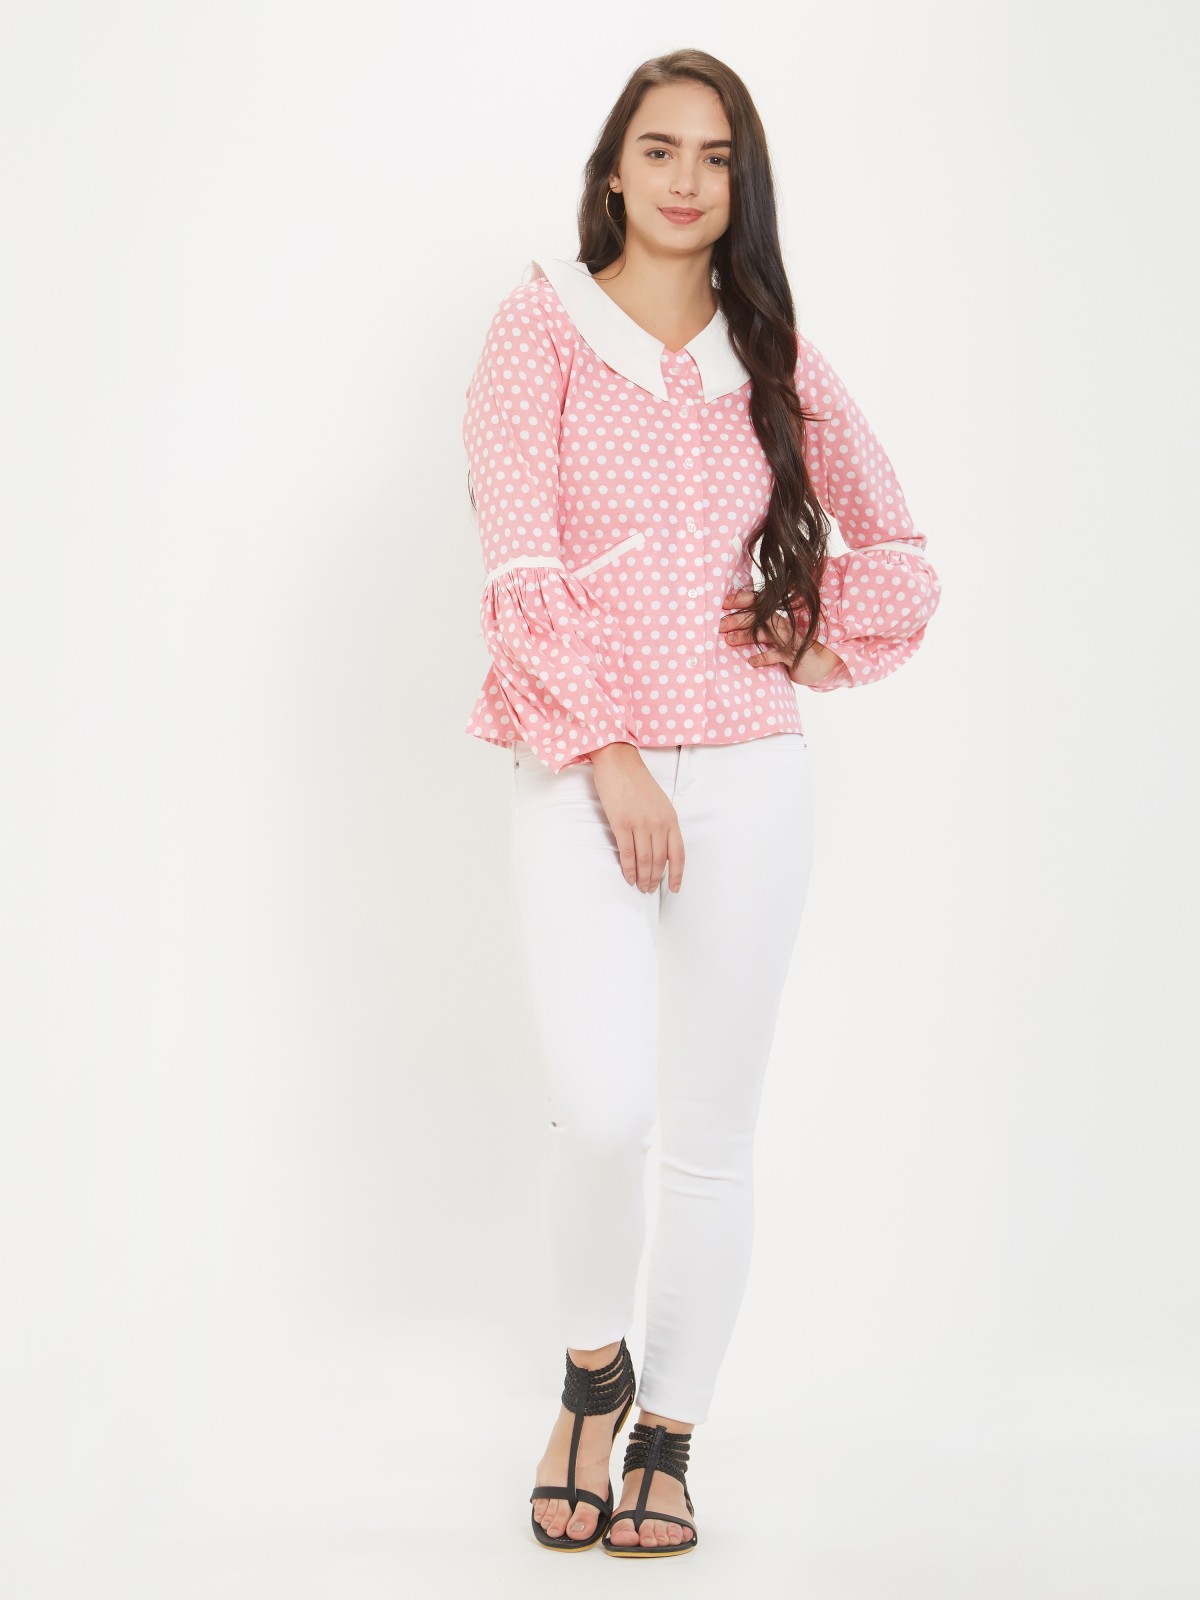  Exclusive Cotton Linen Vintage Styled Pink Polka Dots Top